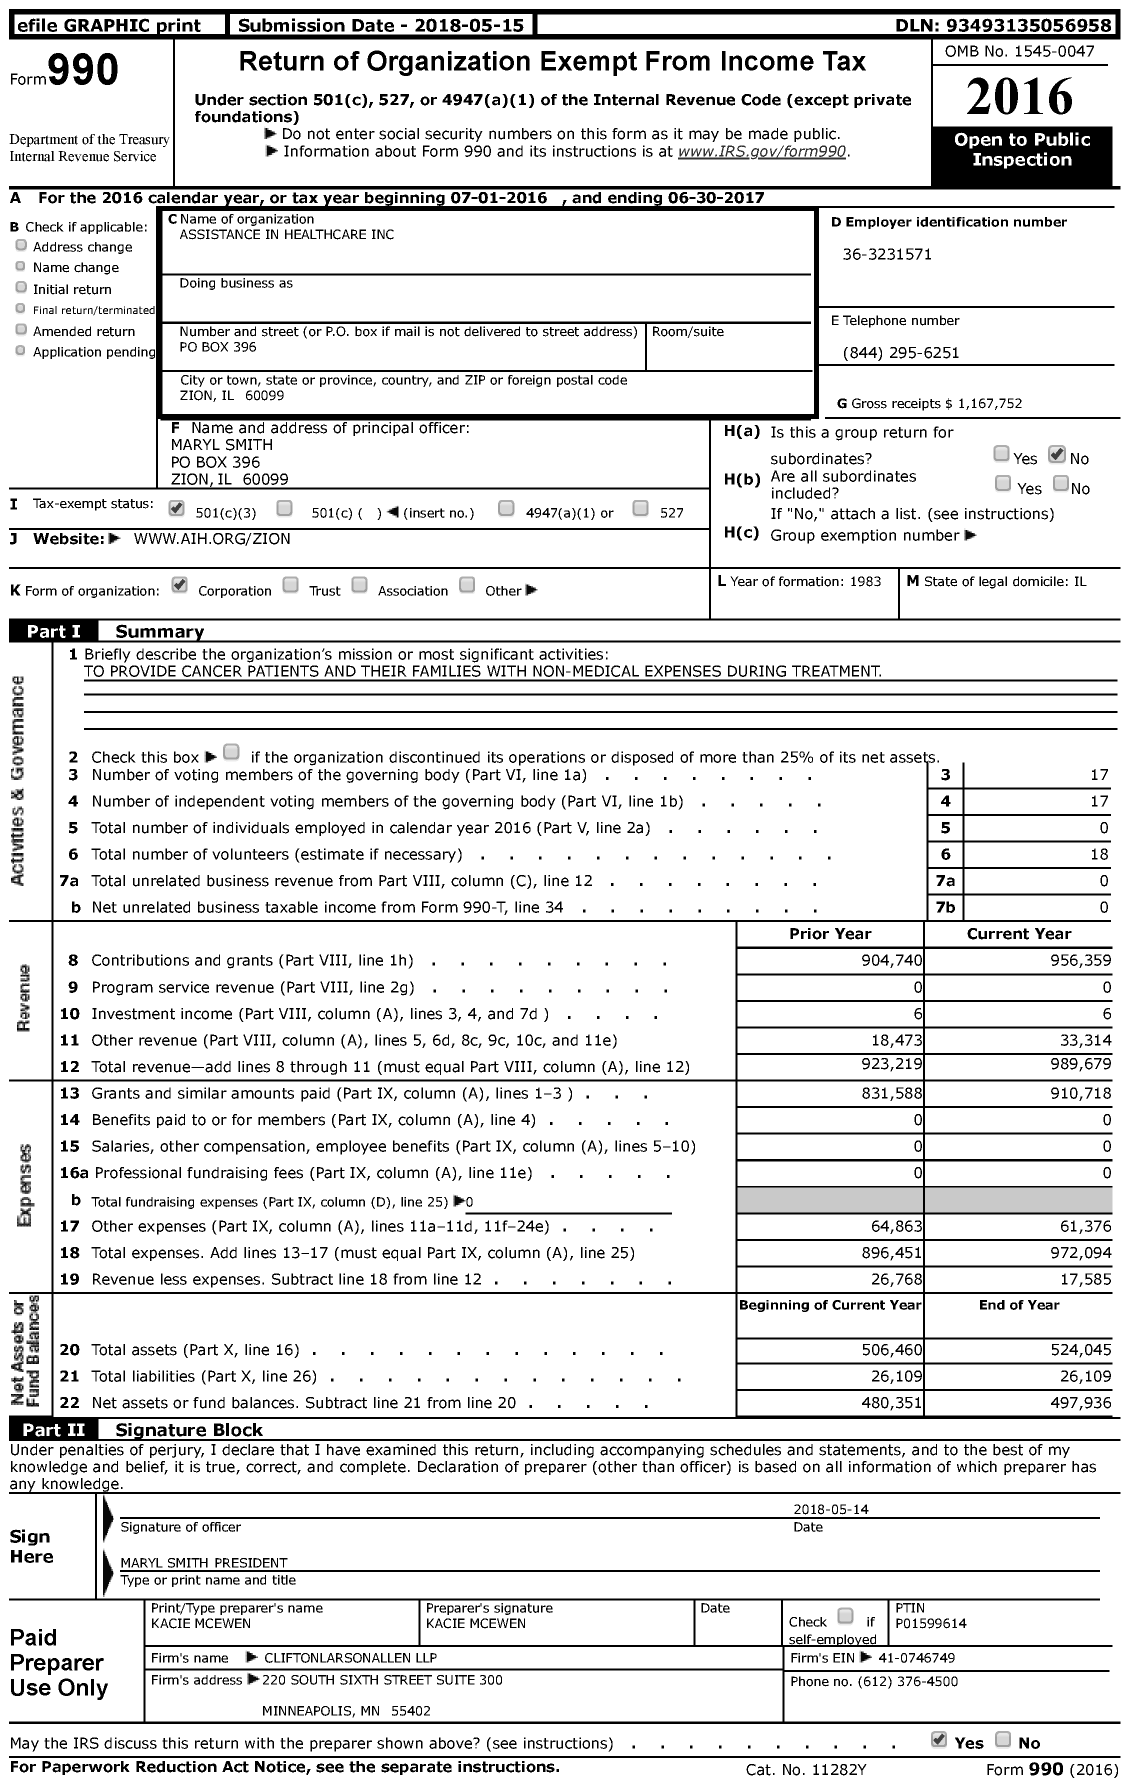 Image of first page of 2016 Form 990 for Assistance in Healthcare